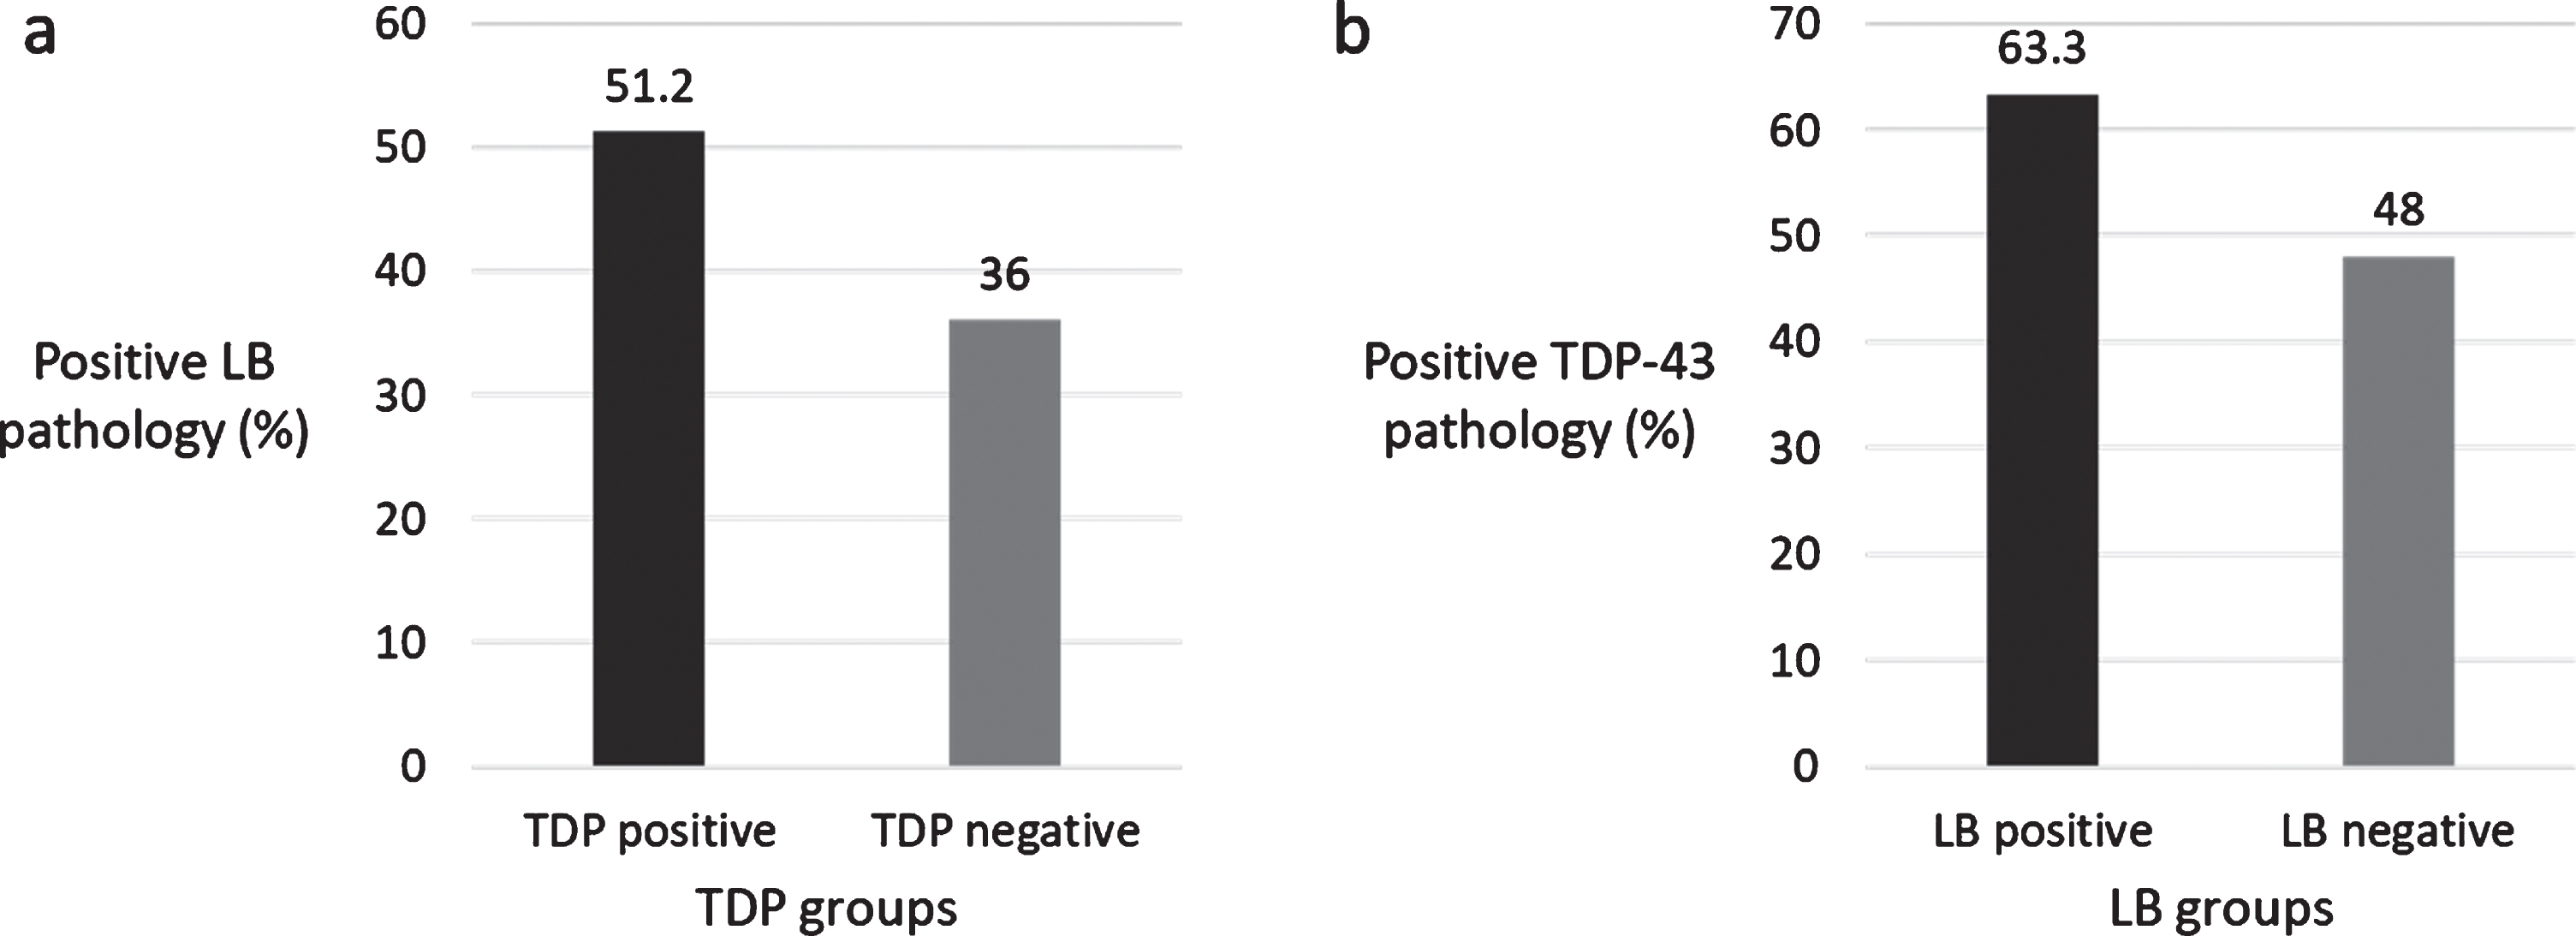 a) Percentage of LB pathology in TDP-43 groups, b) Percentage of TDP-43 pathology in LB groups.